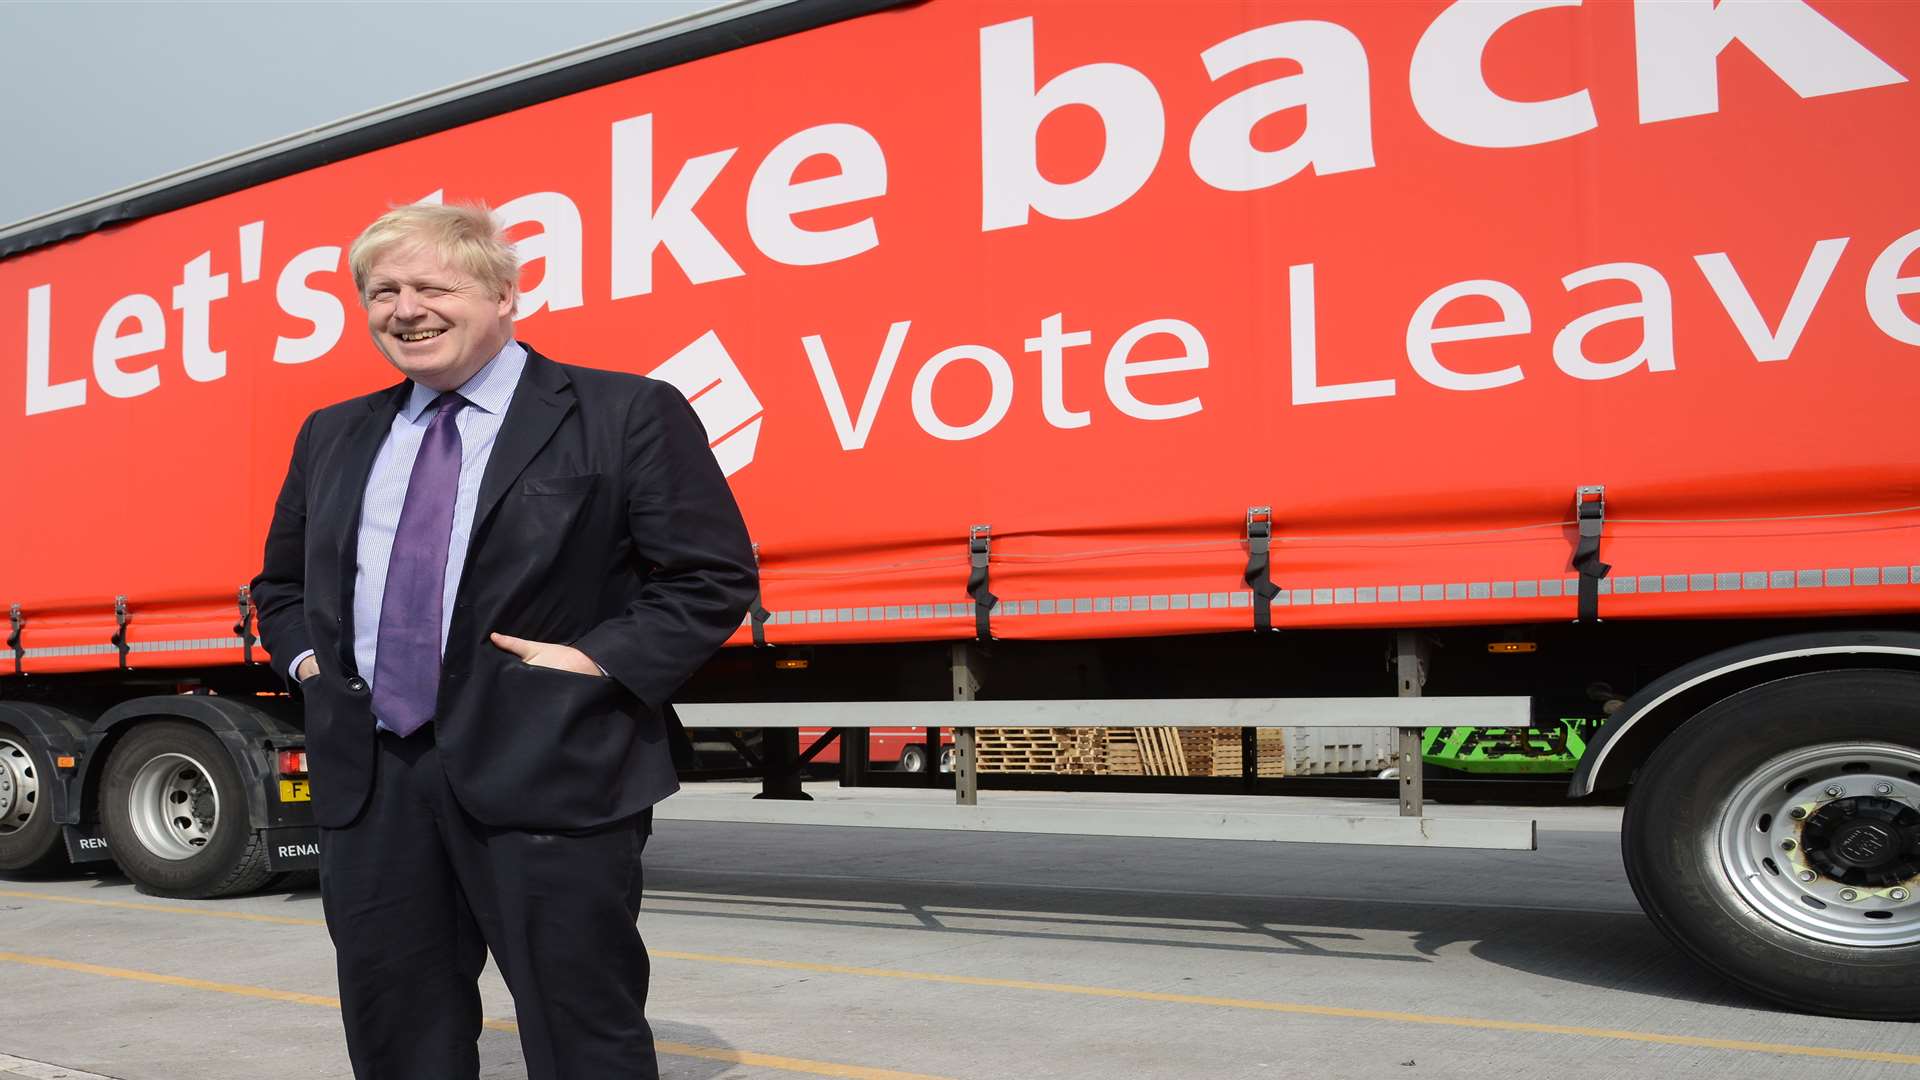 Boris Johnson campaigning for Brexit at Europa Worldwide's Dartford site.